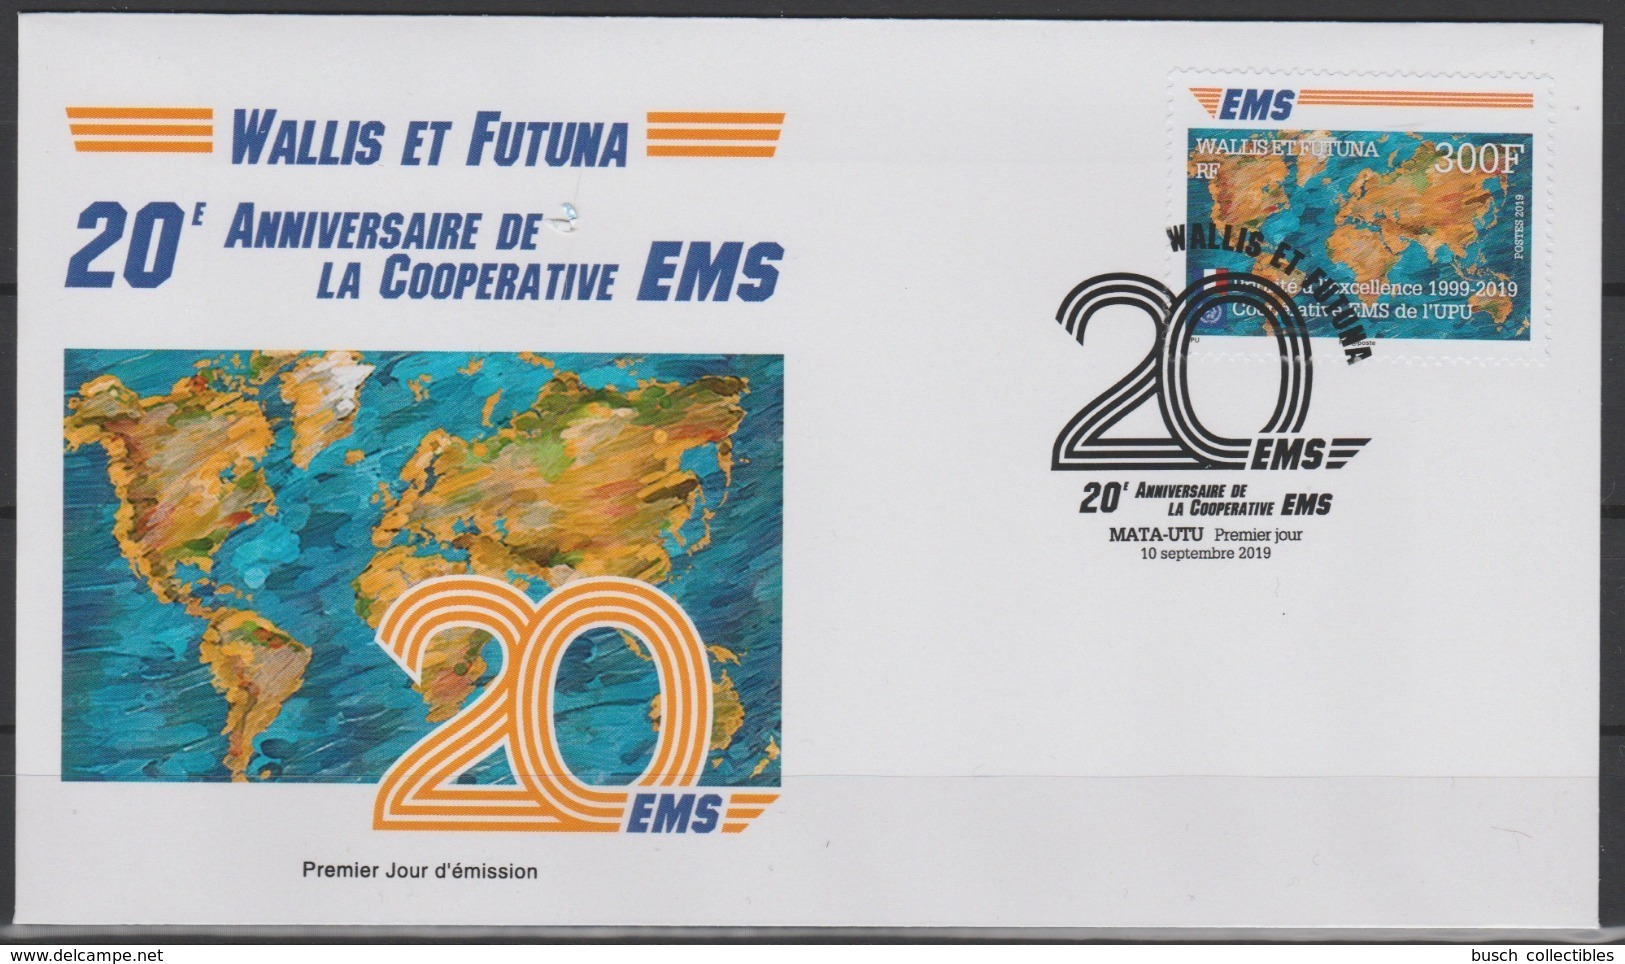 Wallis Et Futuna 2019 Mi. ? FDC First Day 1er Jour Joint Issue 20e Anniversaire EMS 20 Years Emission Commune E.M.S. UPU - FDC